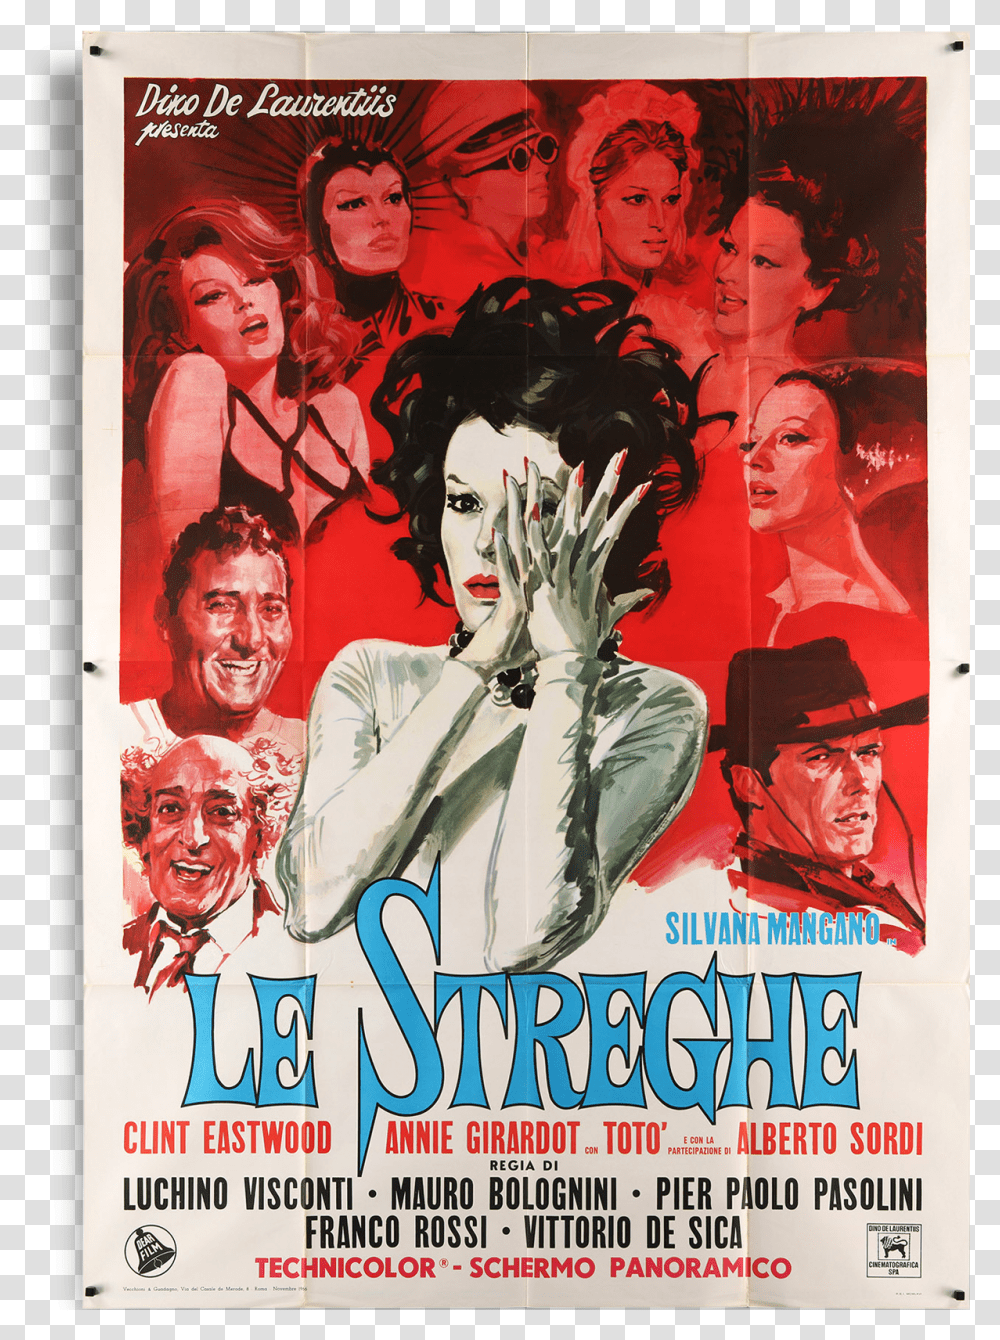 The Original Italian Witches Le Streghe 1967 Dvd Cover, Poster, Advertisement, Flyer, Paper Transparent Png